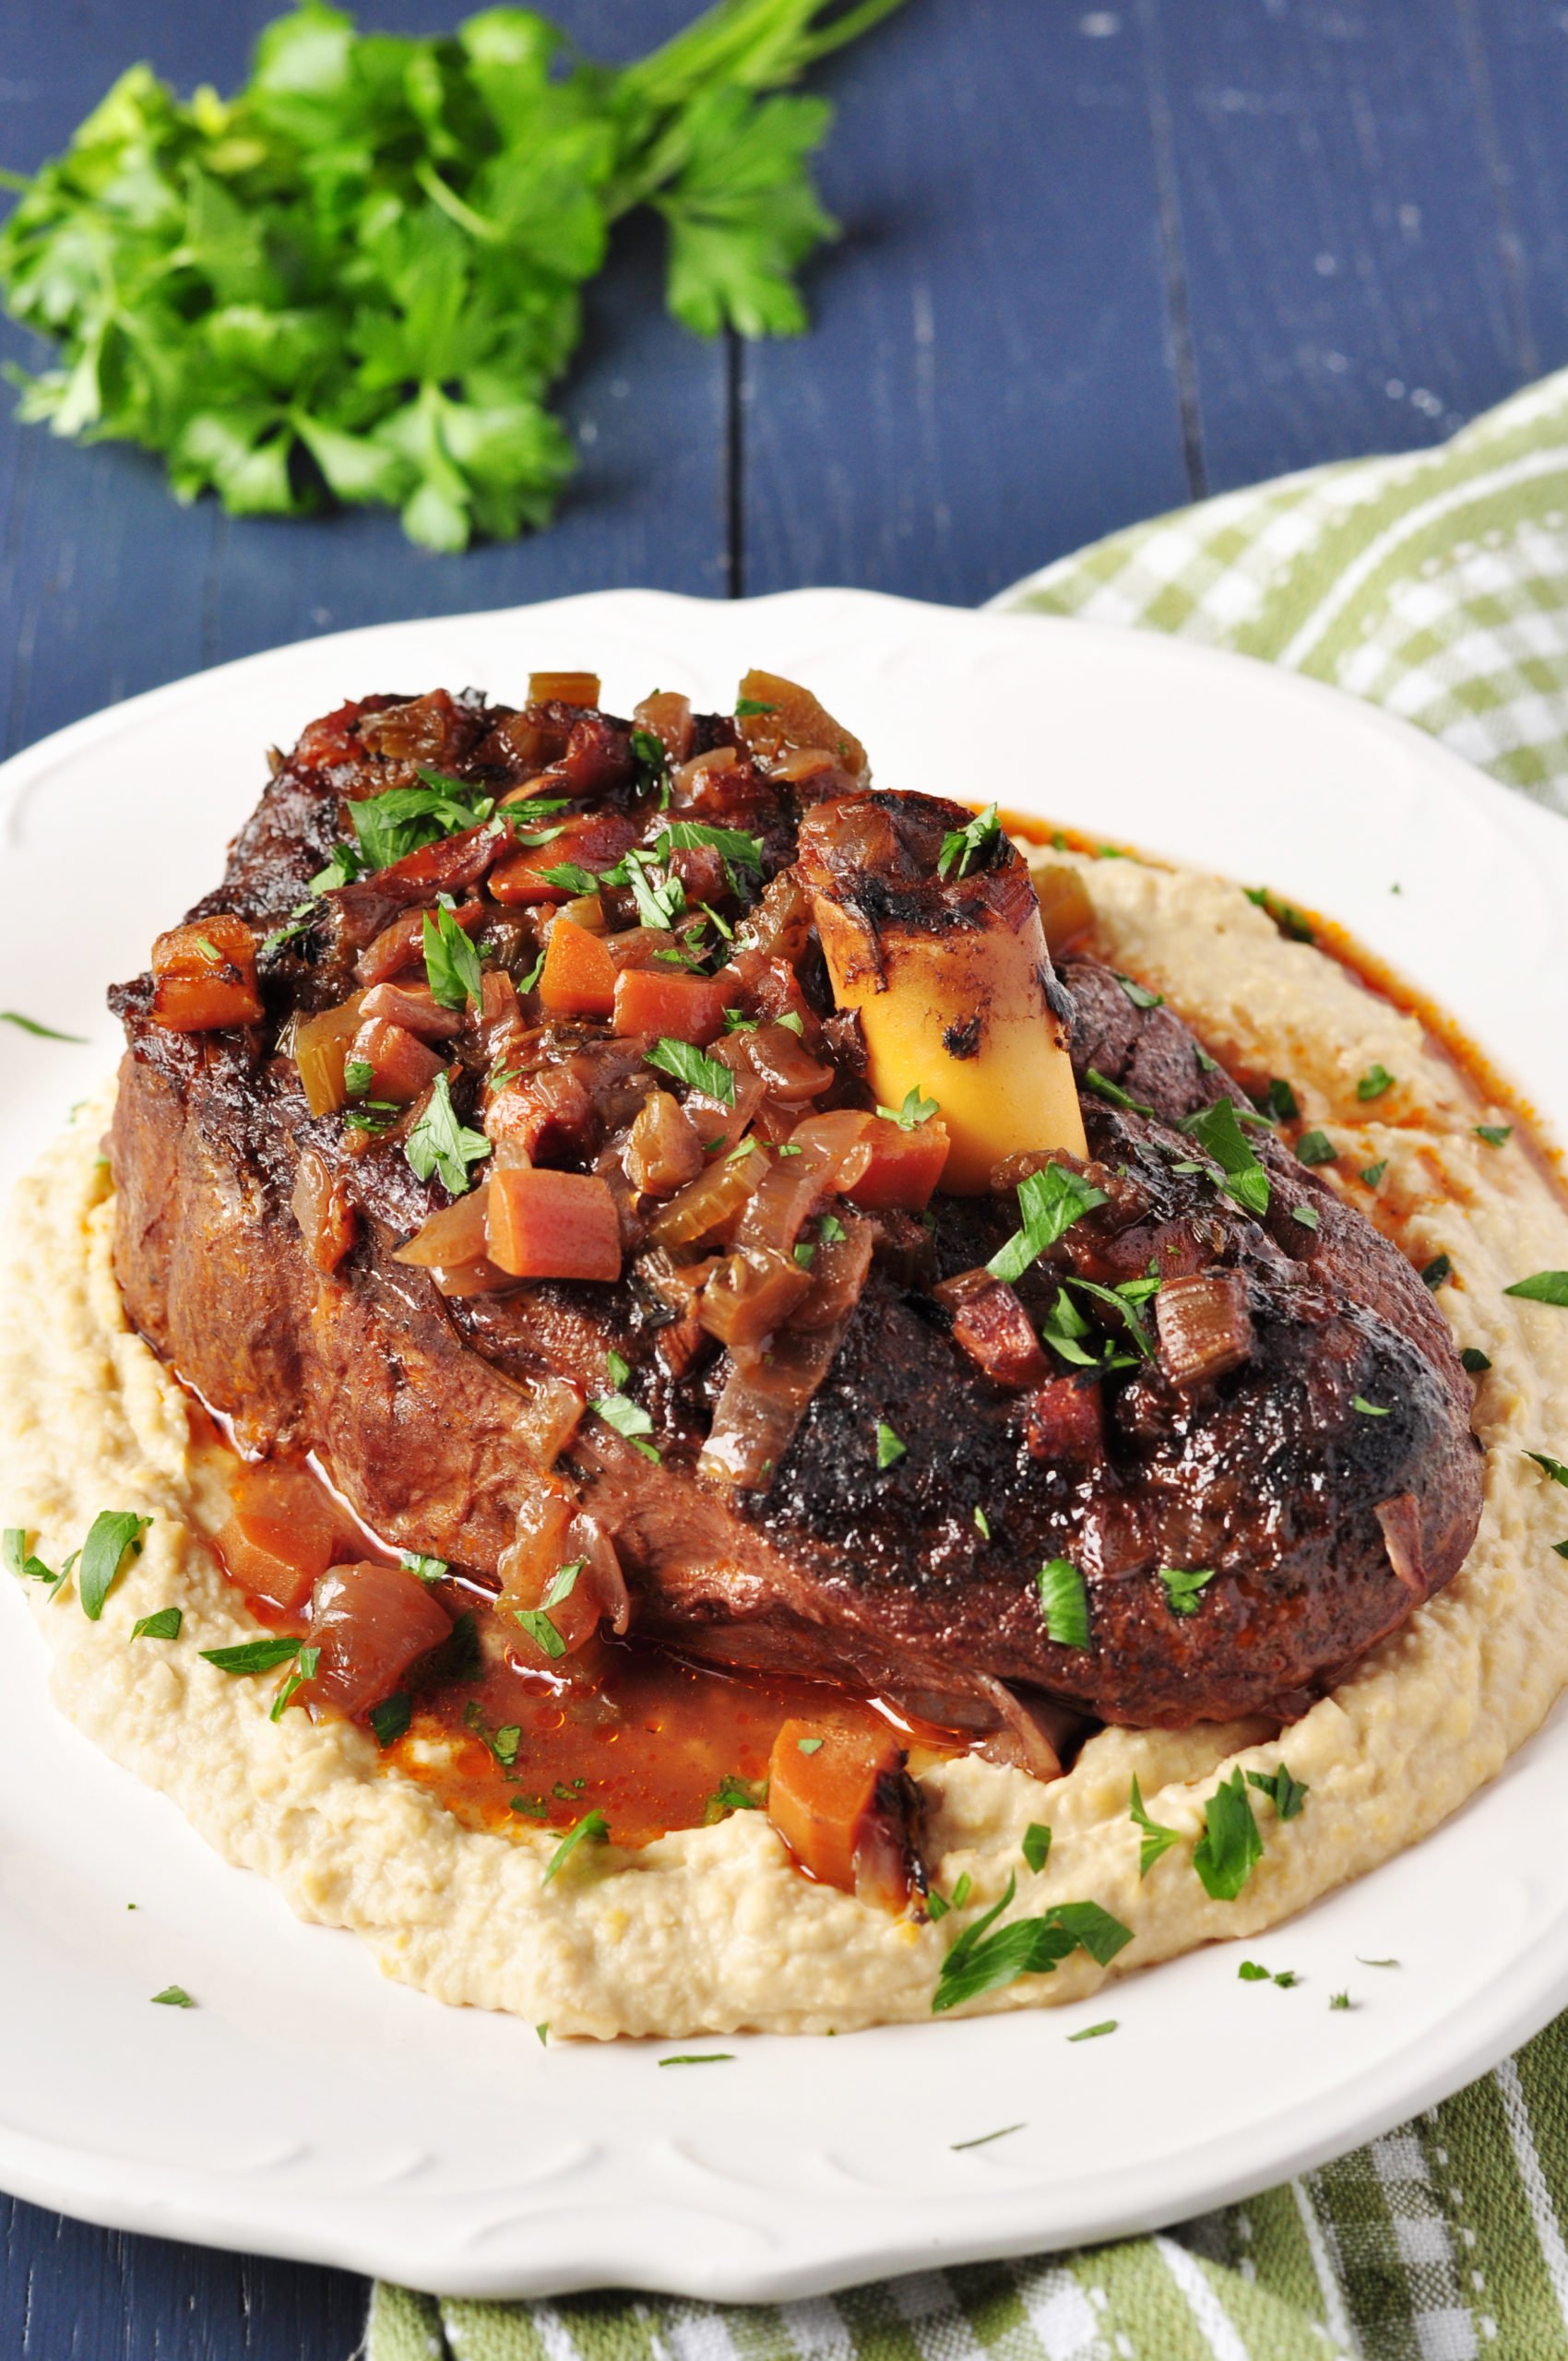 These slow-cooked, fall-off-the-bone-tender braised lamb shanks are perfectly paired with a savory red wine sauce. Just 15 minutes of prep and 8 easy steps.